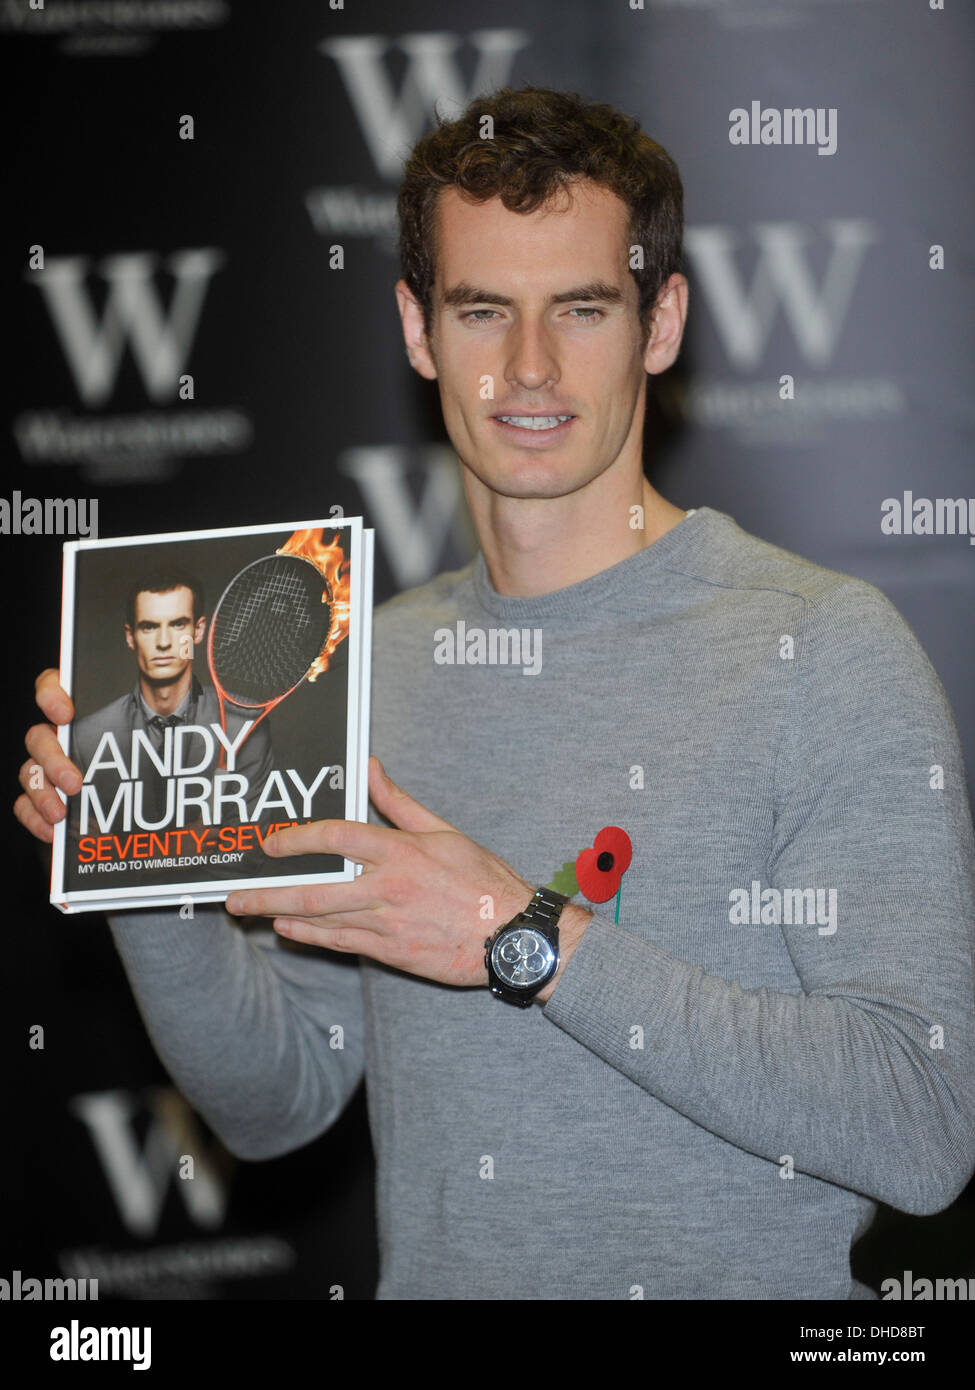 London, UK. 6th Nov, 2013. Andy Murray signs his book 'Seventy-Seven: My Road To Wimbledon Glory' at Waterstones, Piccadilly on November 6th 201 © Brian Jordan/Alamy Live News Stock Photo